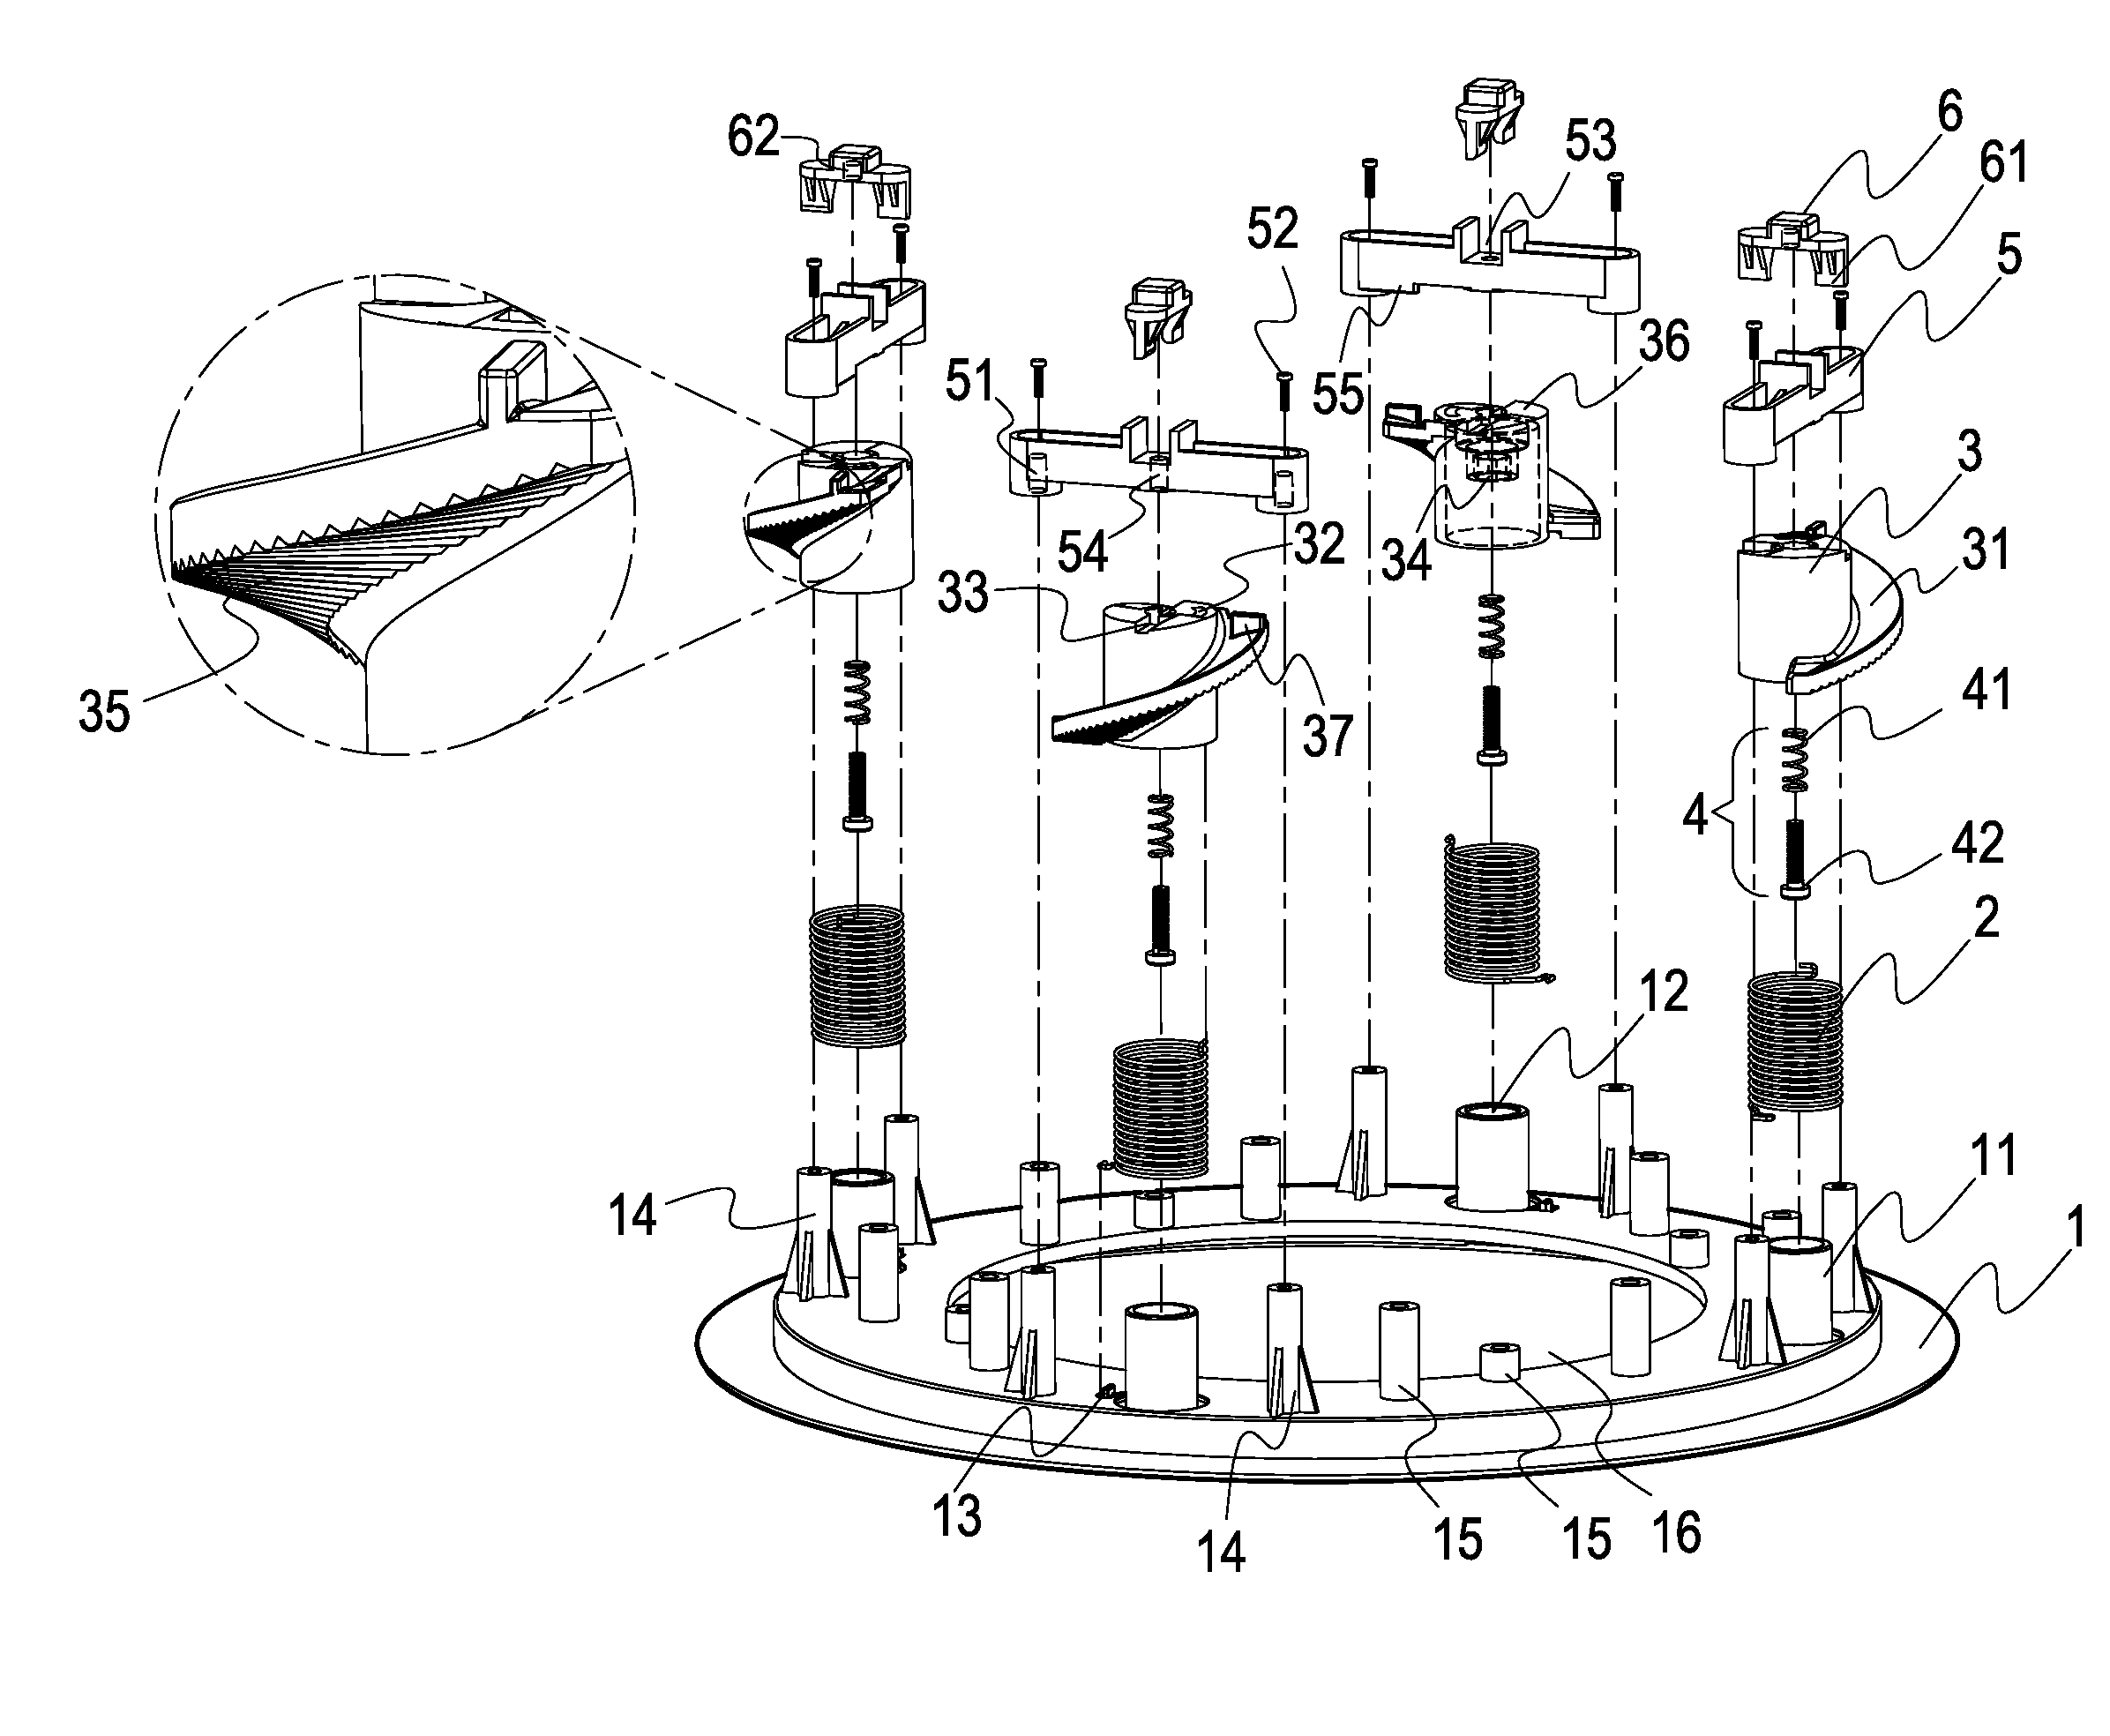 Rapid installation and detachment device for flush mounting speaker on ceiling or wall